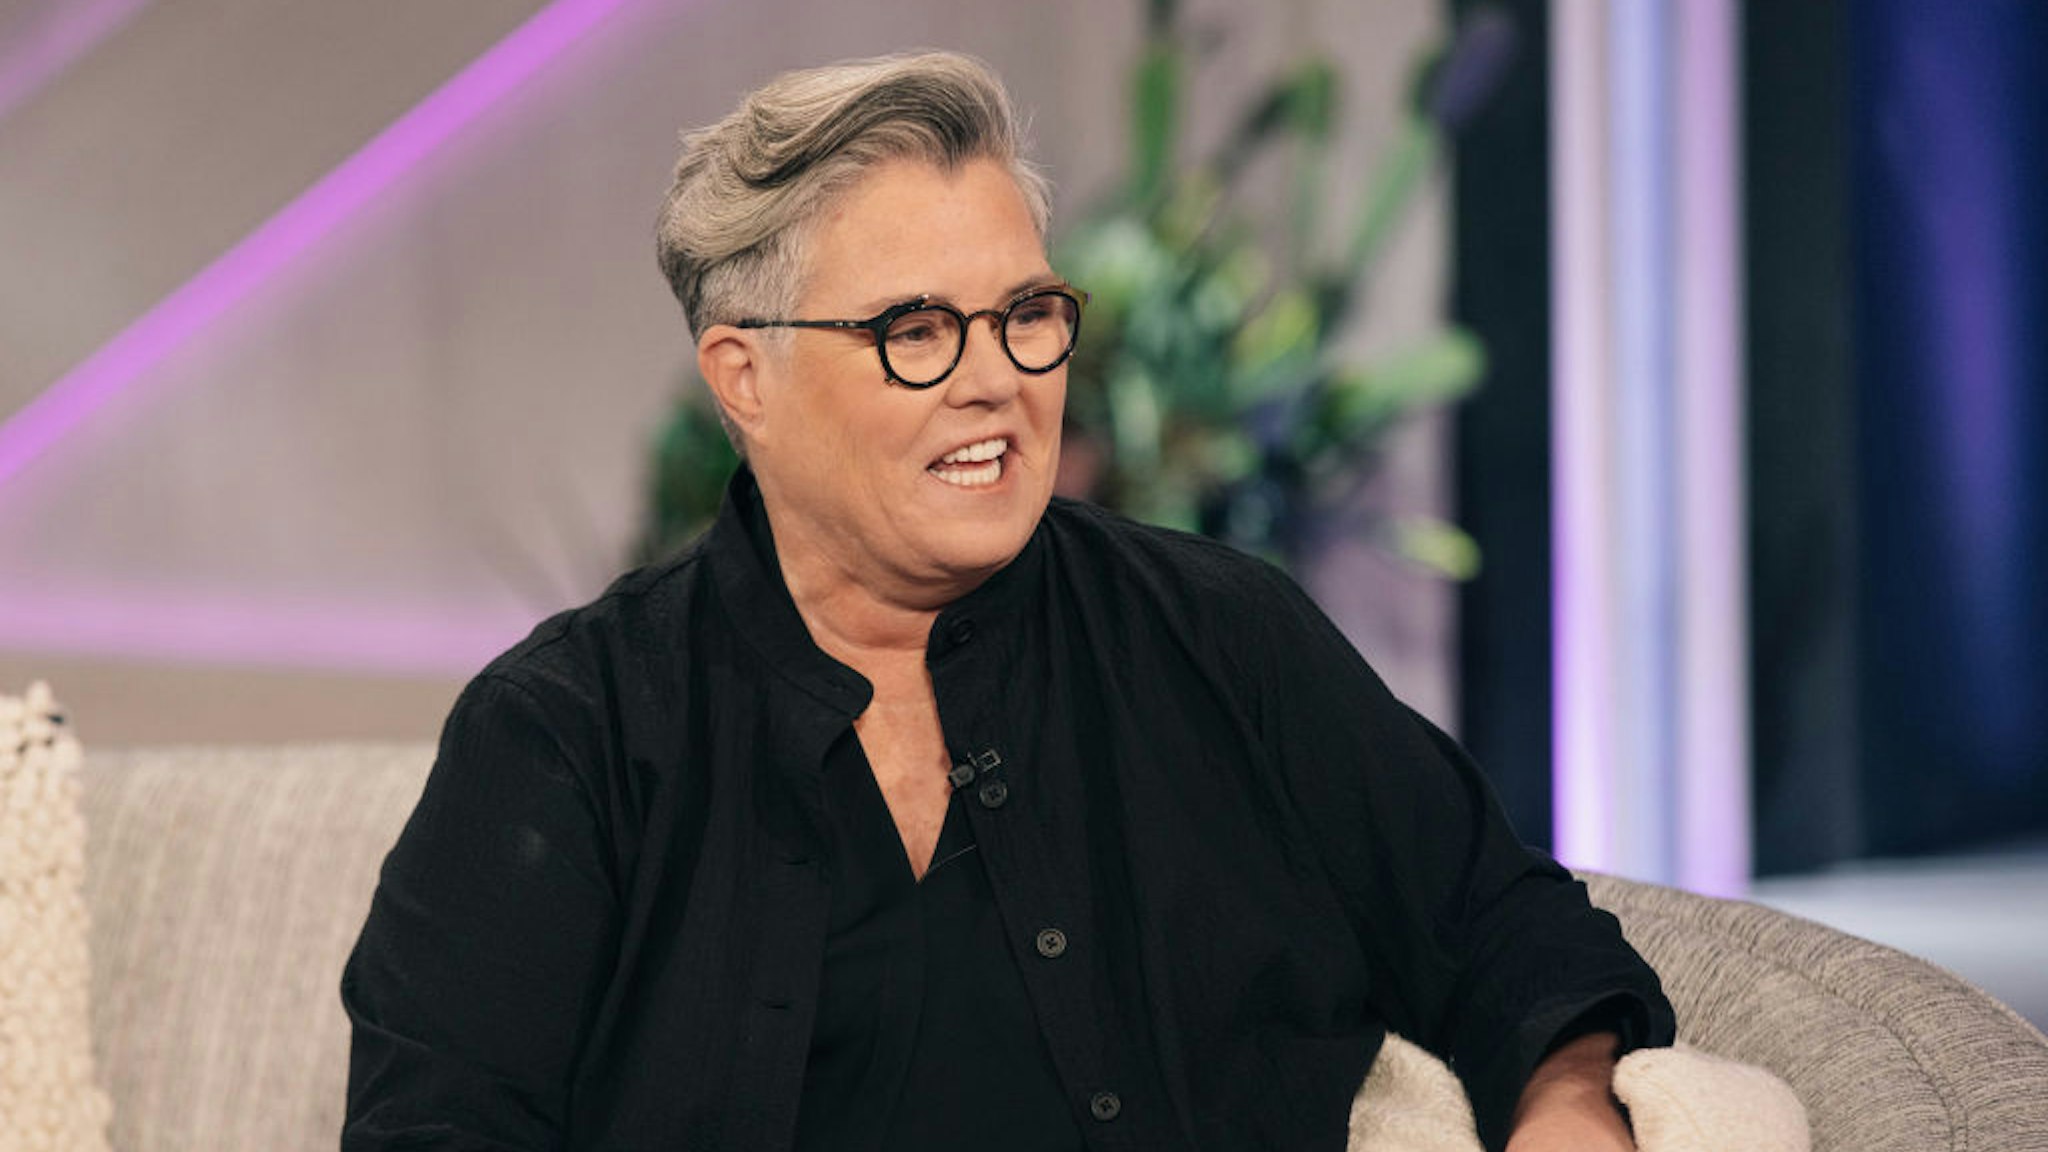 THE KELLY CLARKSON SHOW -- Episode J018 -- Pictured: Rosie O'Donnell -- (Photo by: Weiss Eubanks/NBCUniversal via Getty Images)